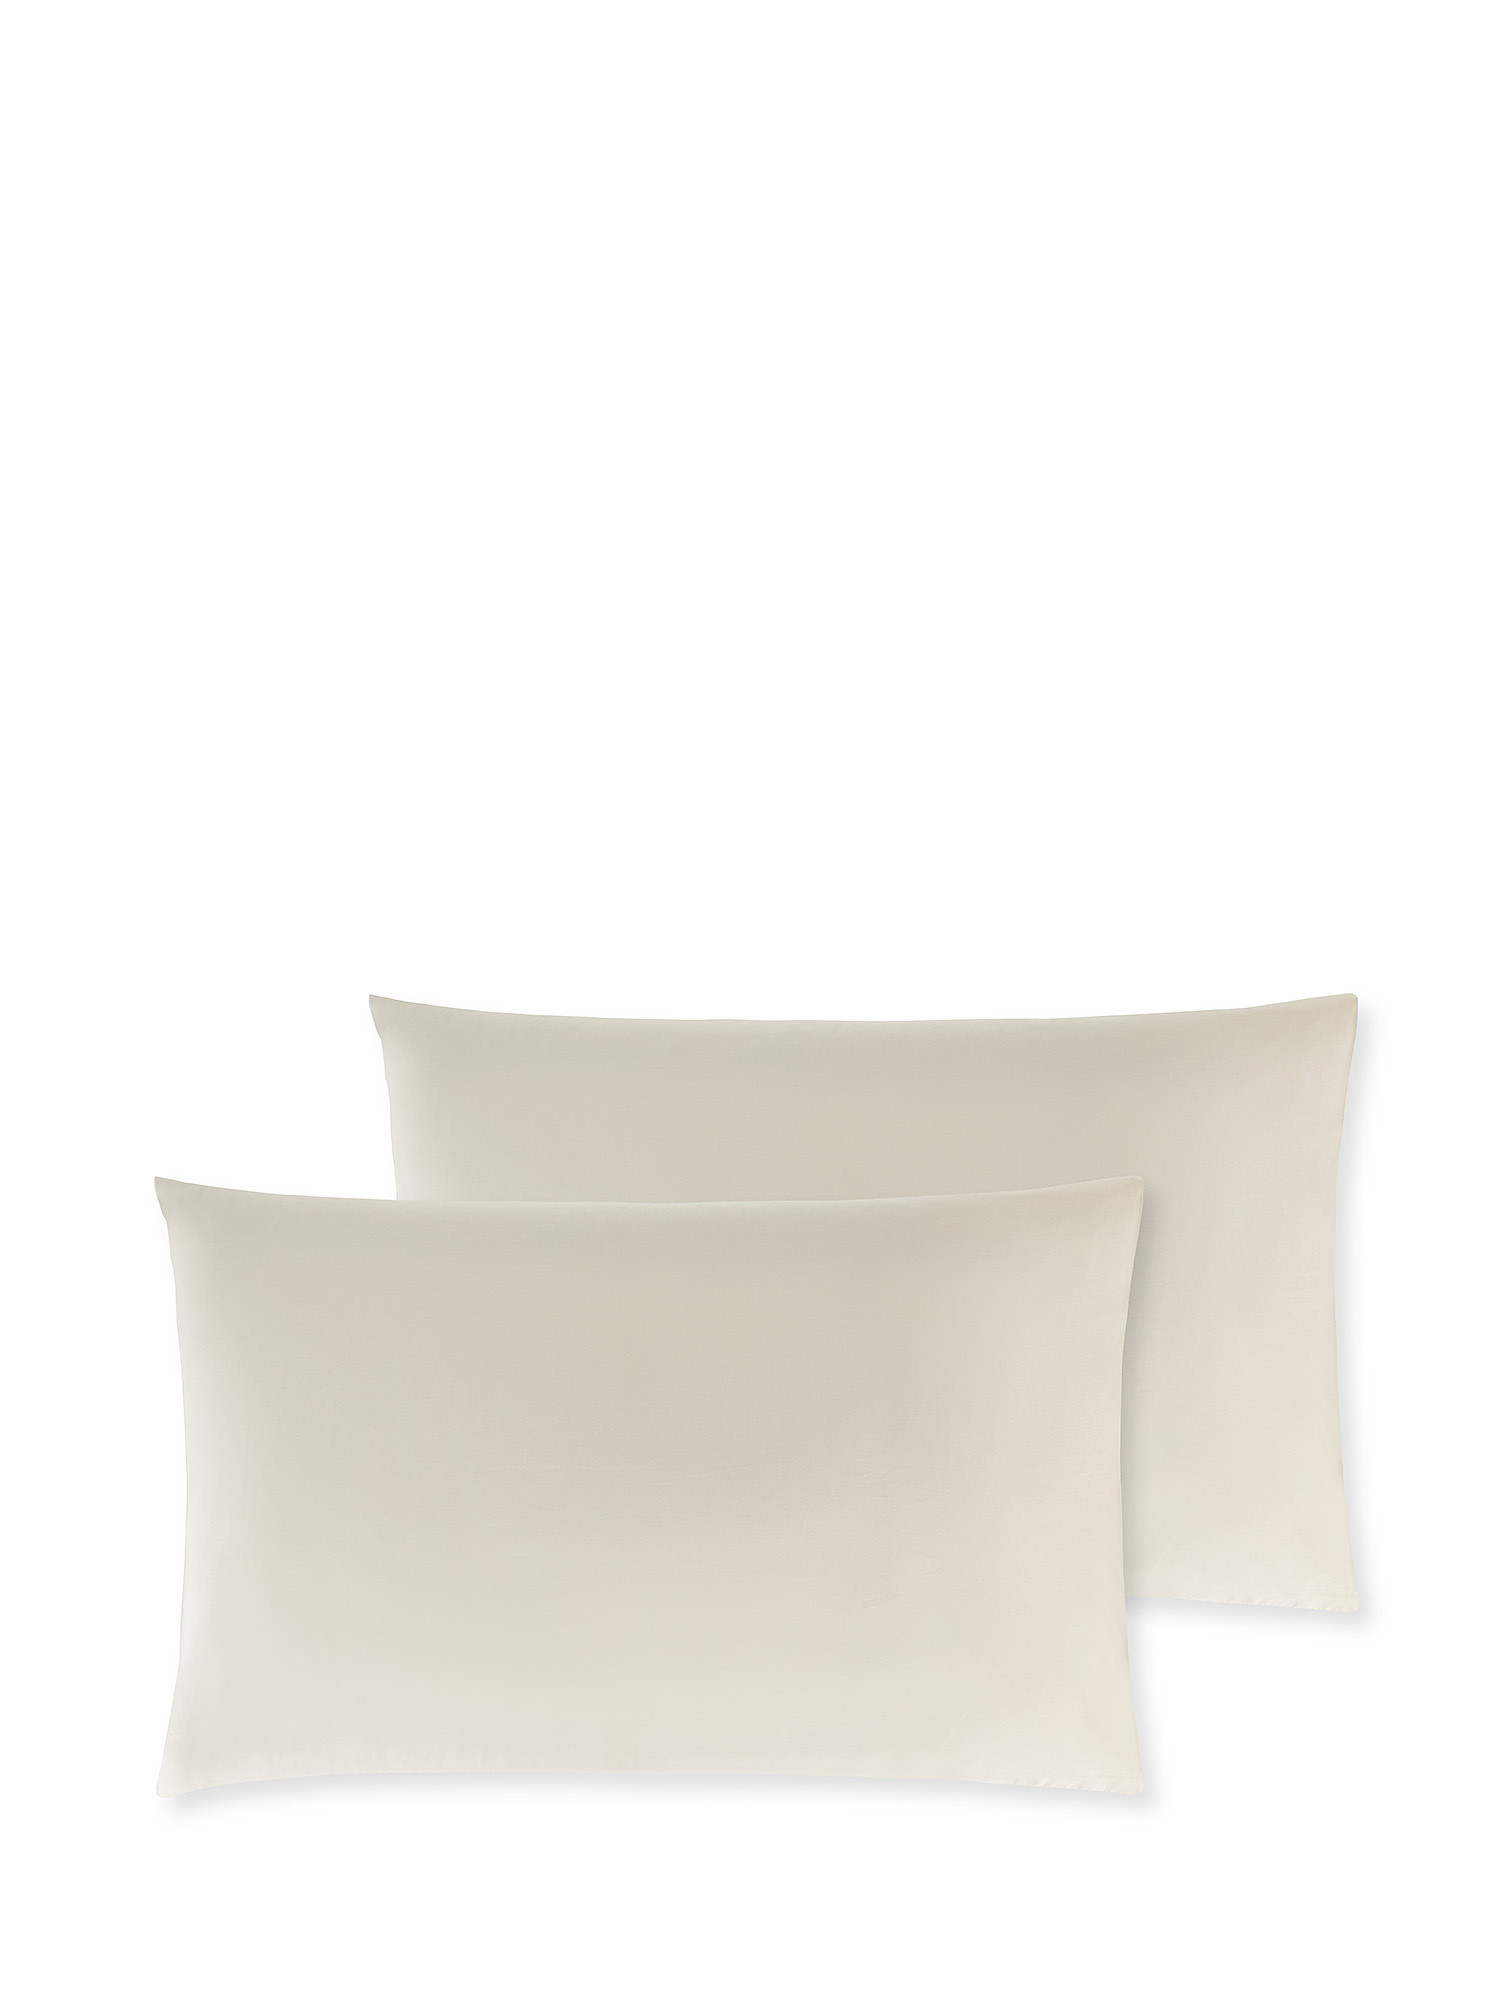 Set of 2 solid color percale cotton pillowcases., Beige, large image number 0